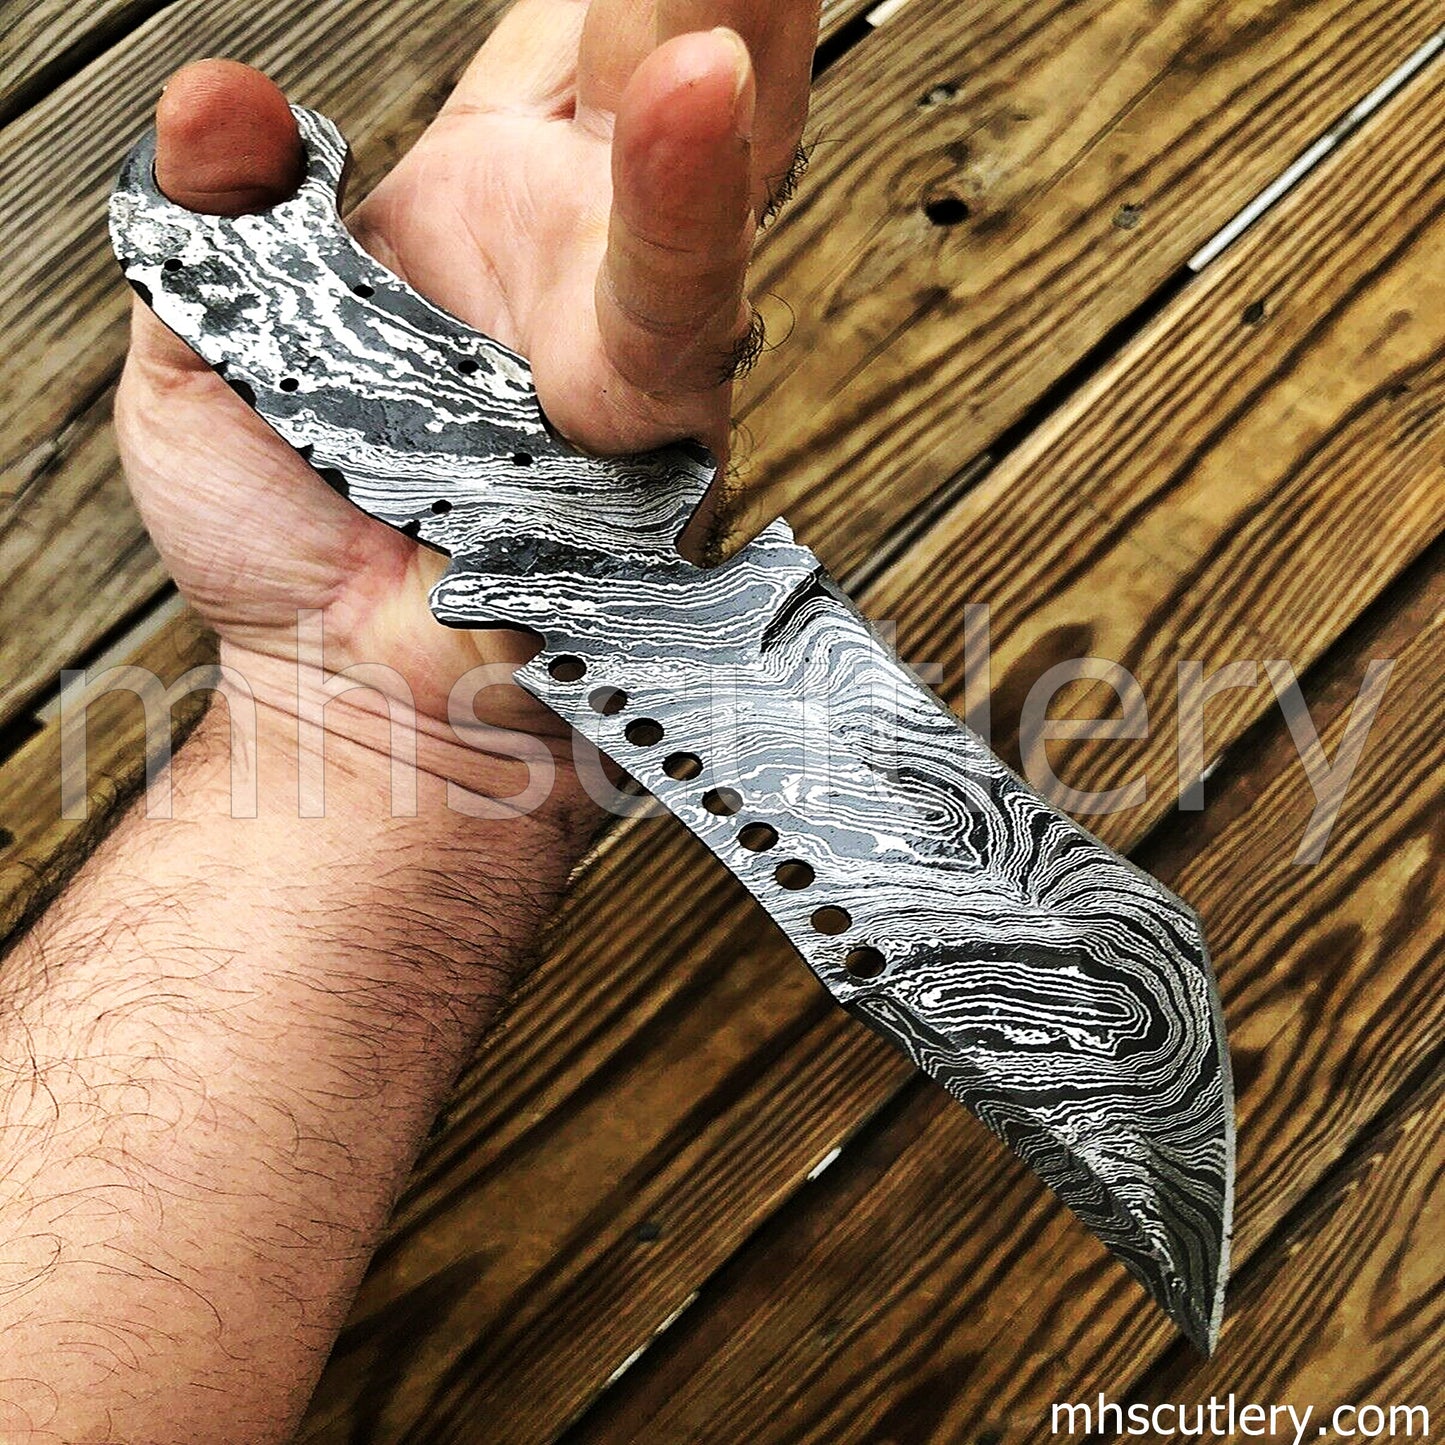 Damascus Steel Tactical Tracker Knife Blank Blade For Knife Makers | mhscutlery